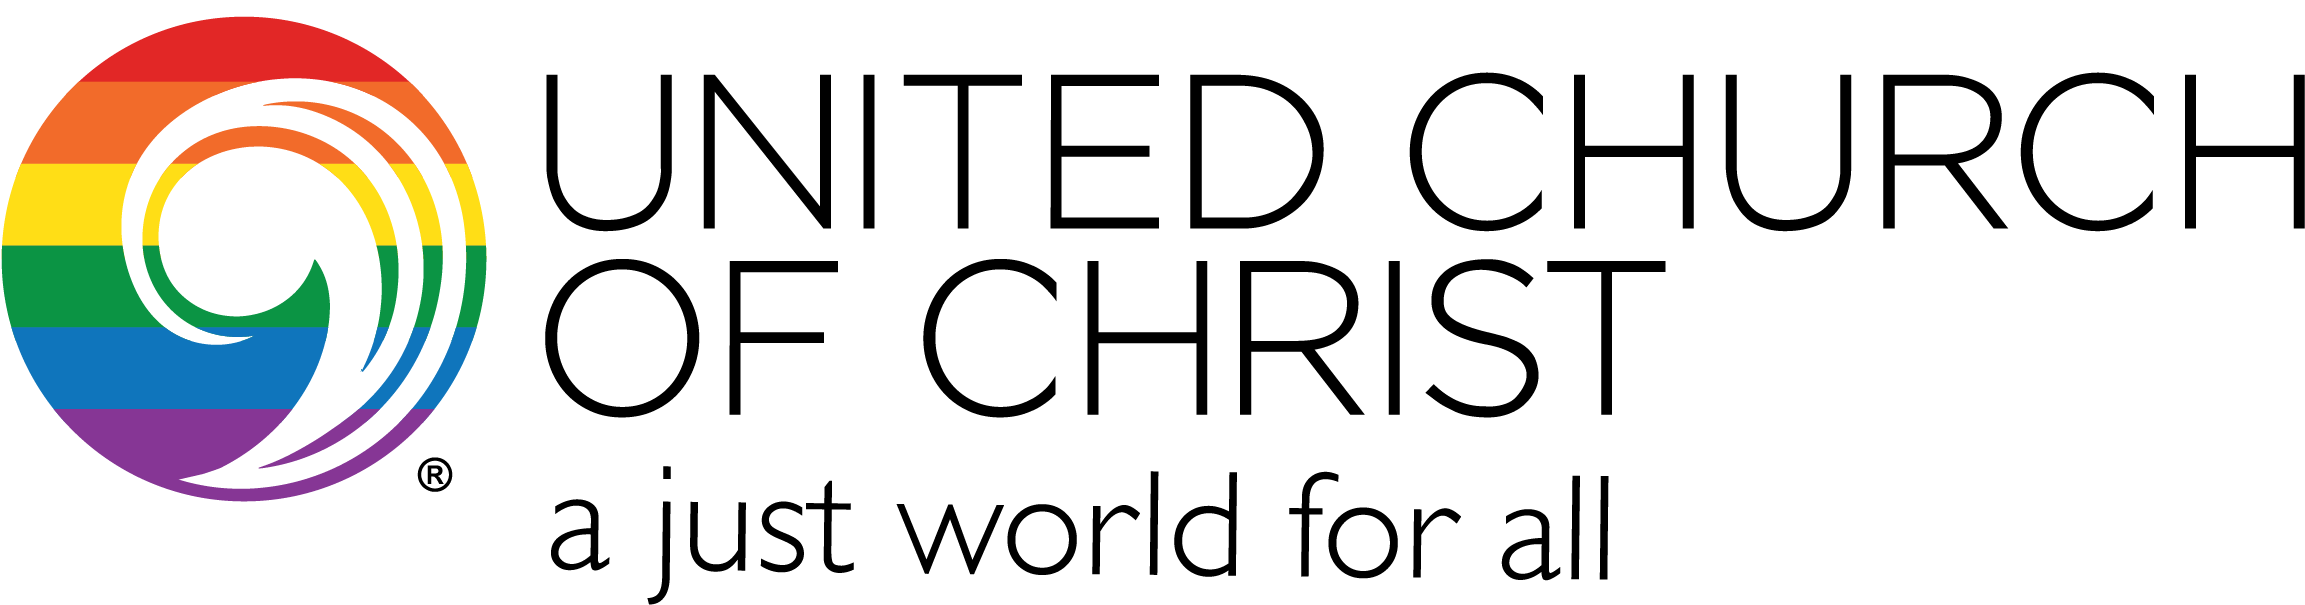 White Circle with Red Comma Logo - UCC Brand Guidelines - United Church of Christ